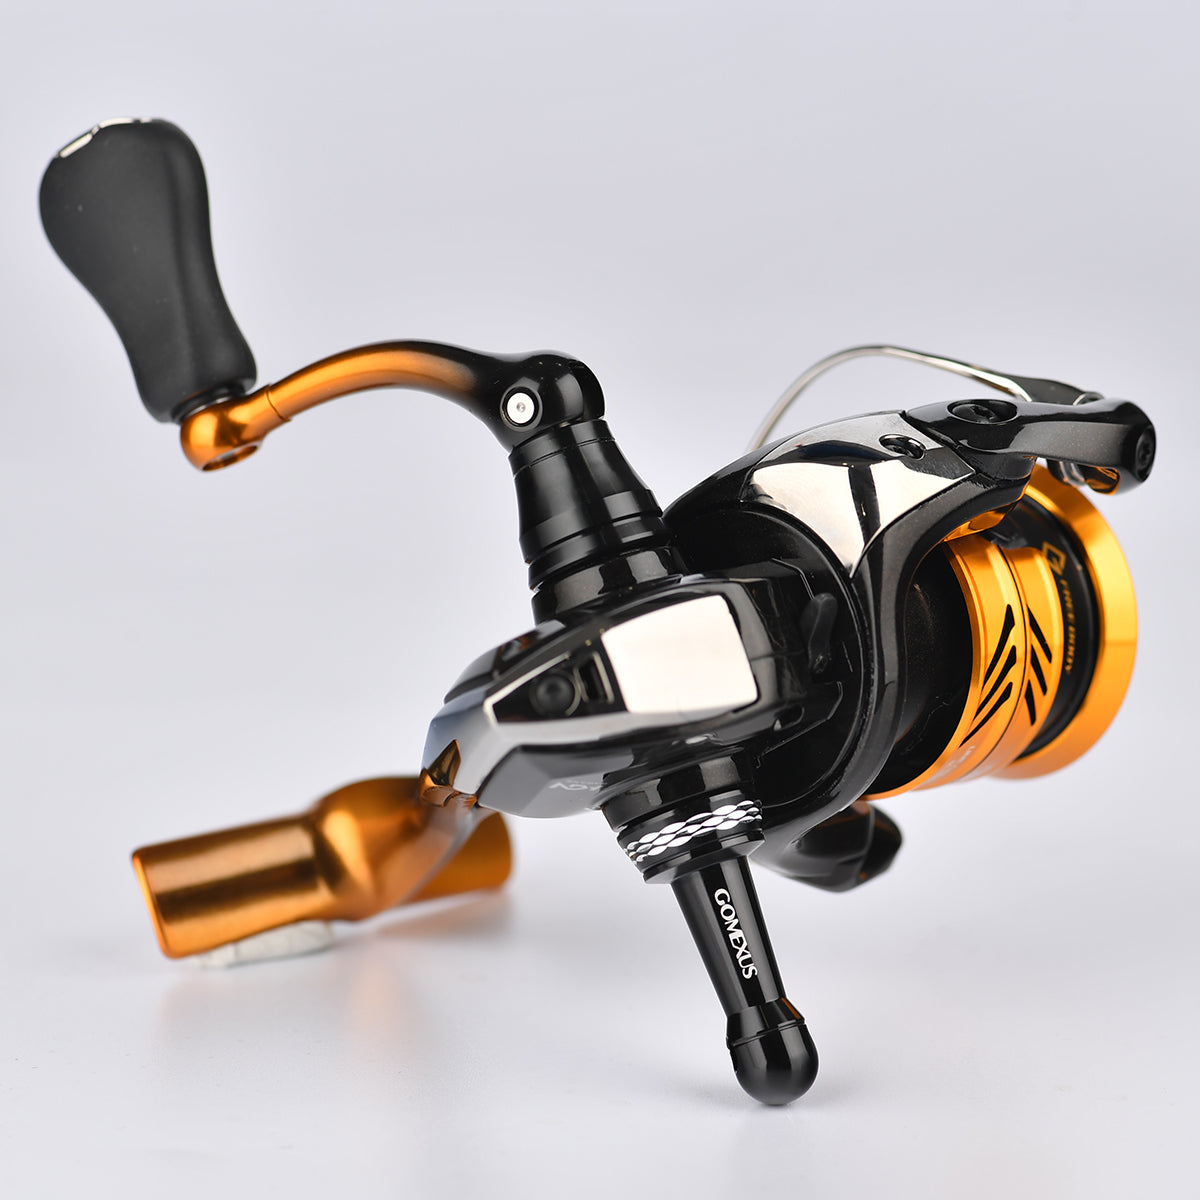 Reel Stand R8 for Shimano Reels – The Hook Up Tackle